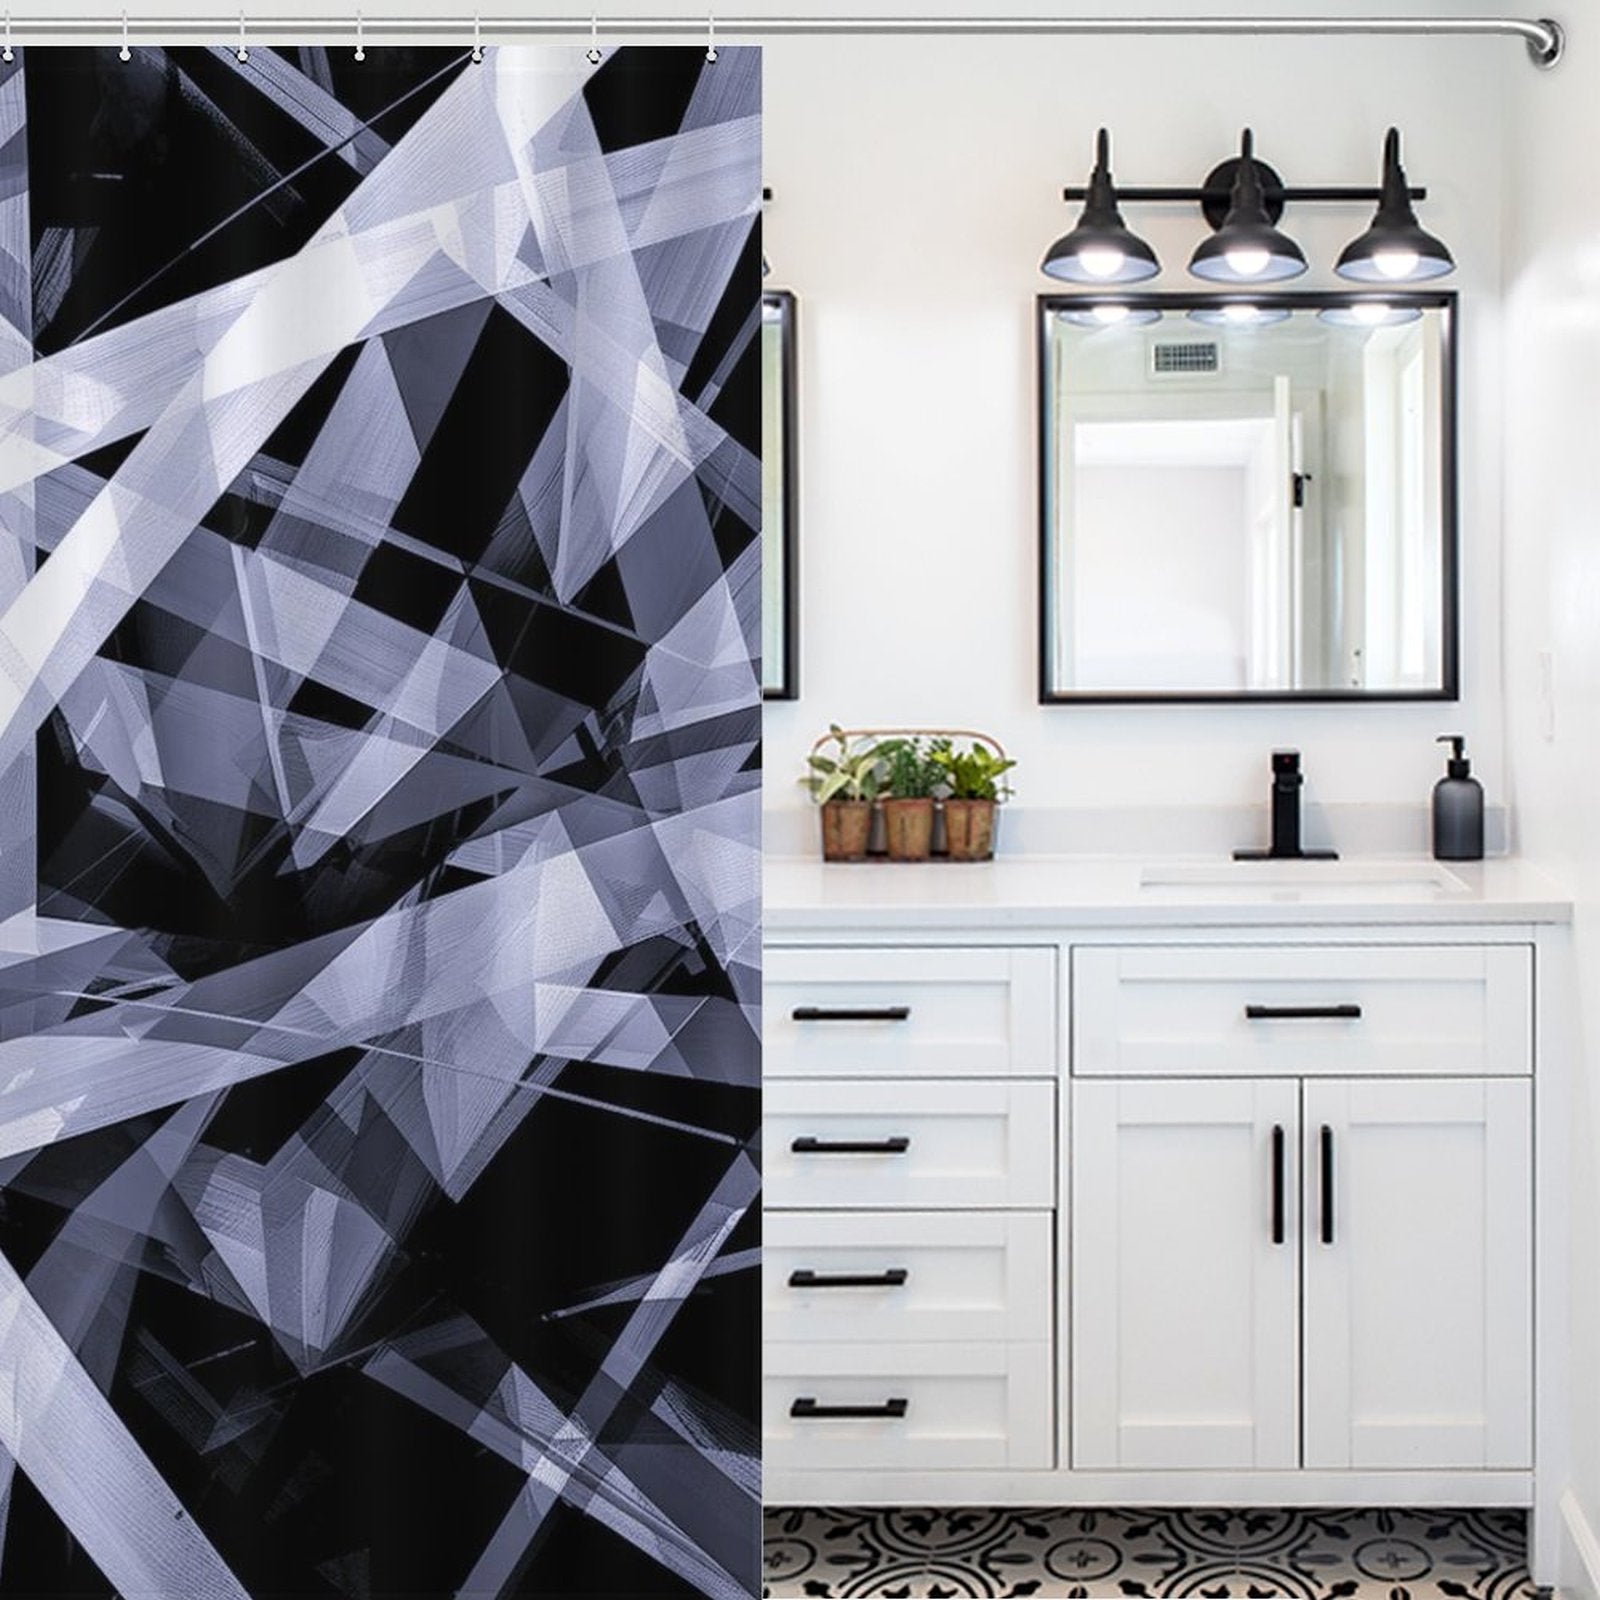 Bathroom featuring a modern Geometric Black and White Abstract Art Minimalist Line Shower Curtain-Cottoncat by Cotton Cat, a white vanity with black handles, a wall-mounted mirror, and a row of three light fixtures, embodying minimalist bathroom decor.